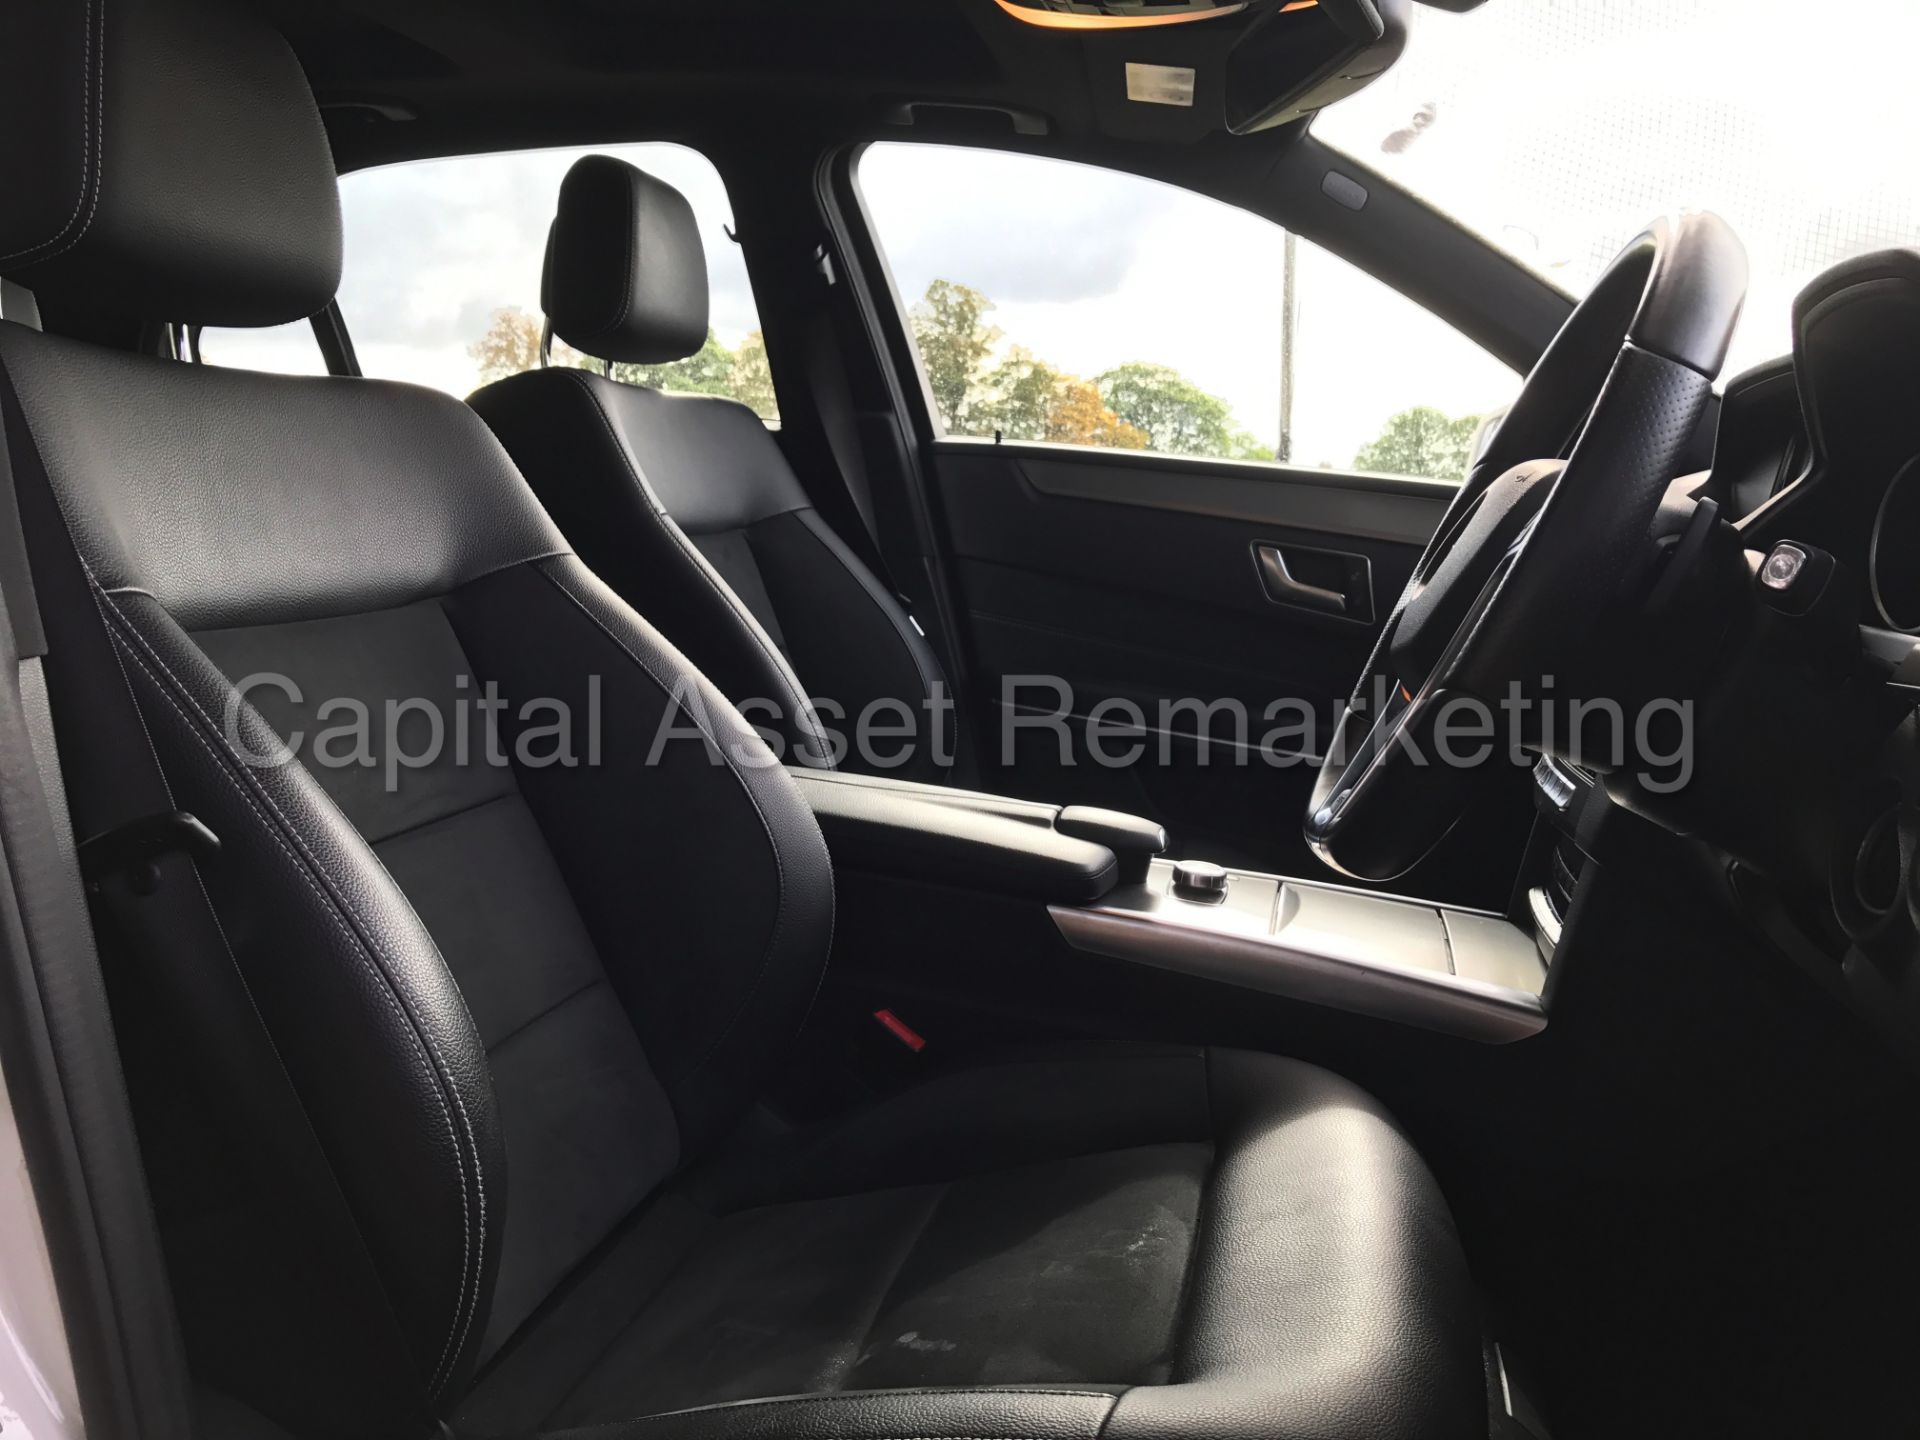 MERCEDES-BENZ E220 'AMG SPORT' (2015 MODEL) 'SALOON - AUTO - PAN ROOF - SAT NAV - LEATHER' *LOOK* - Image 28 of 33